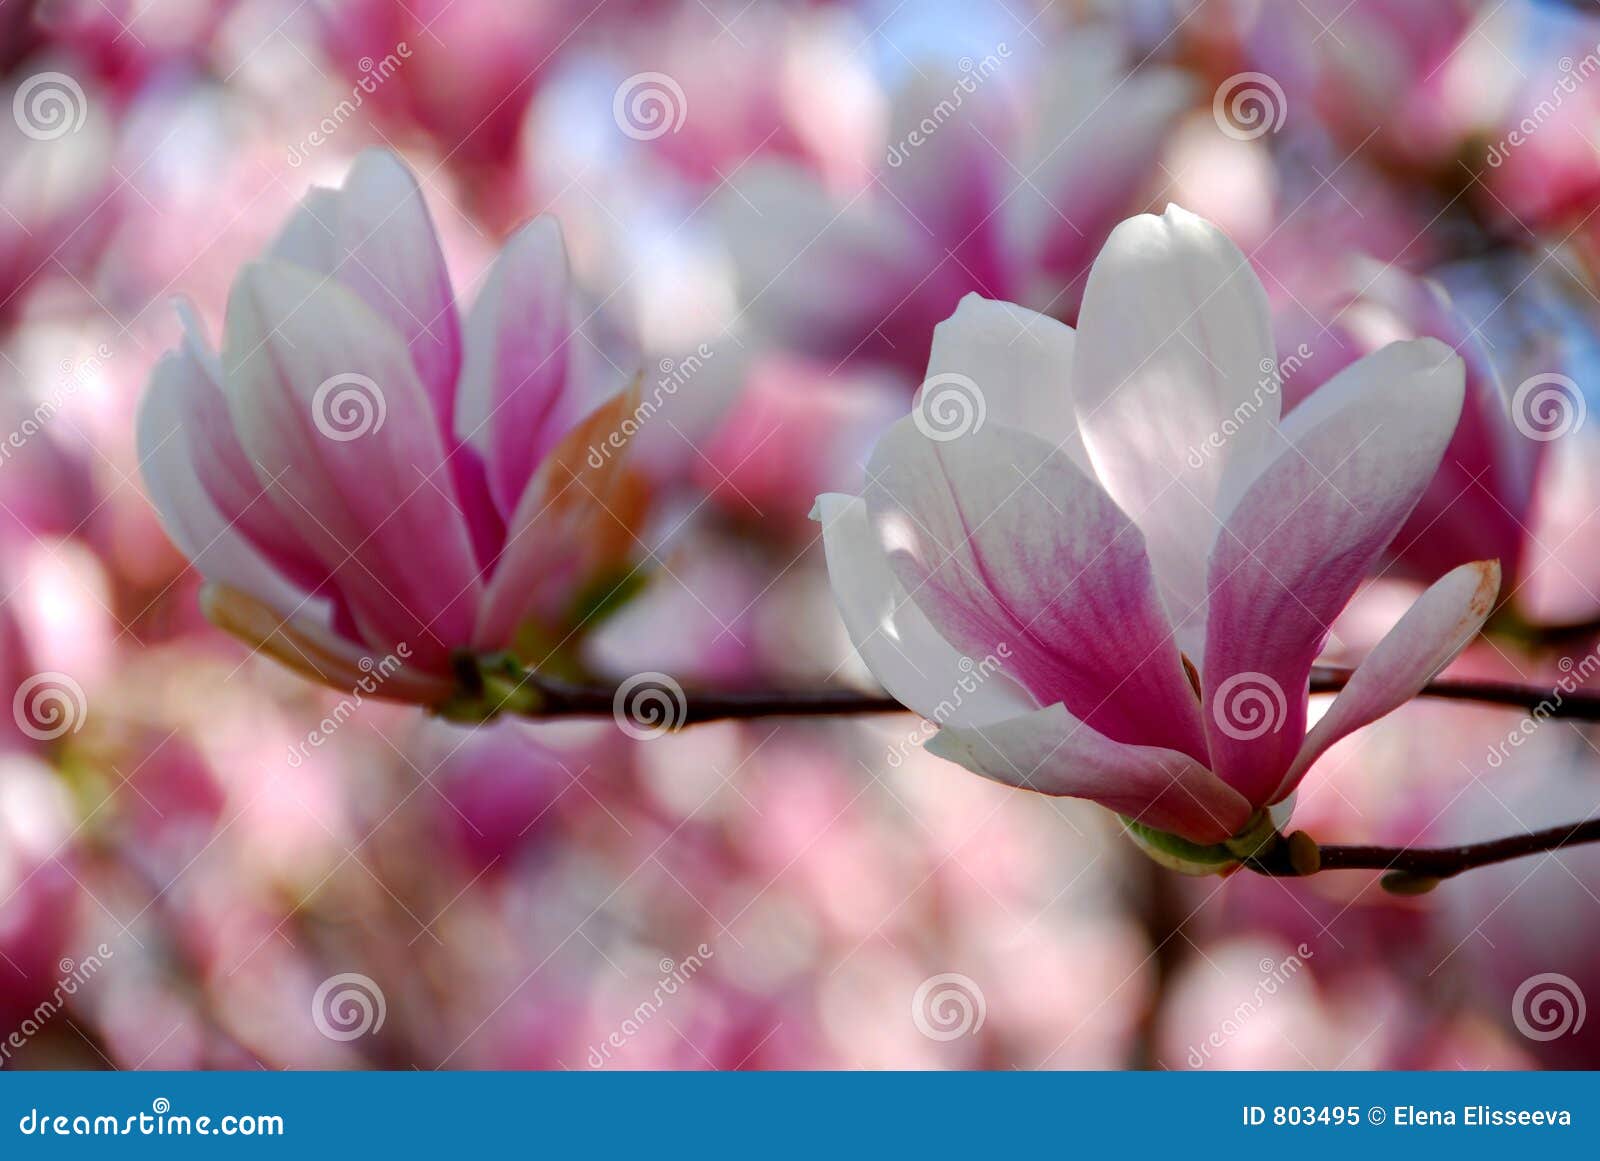 Magnolia flowers stock image. Image of nature, branch, detail - 803495